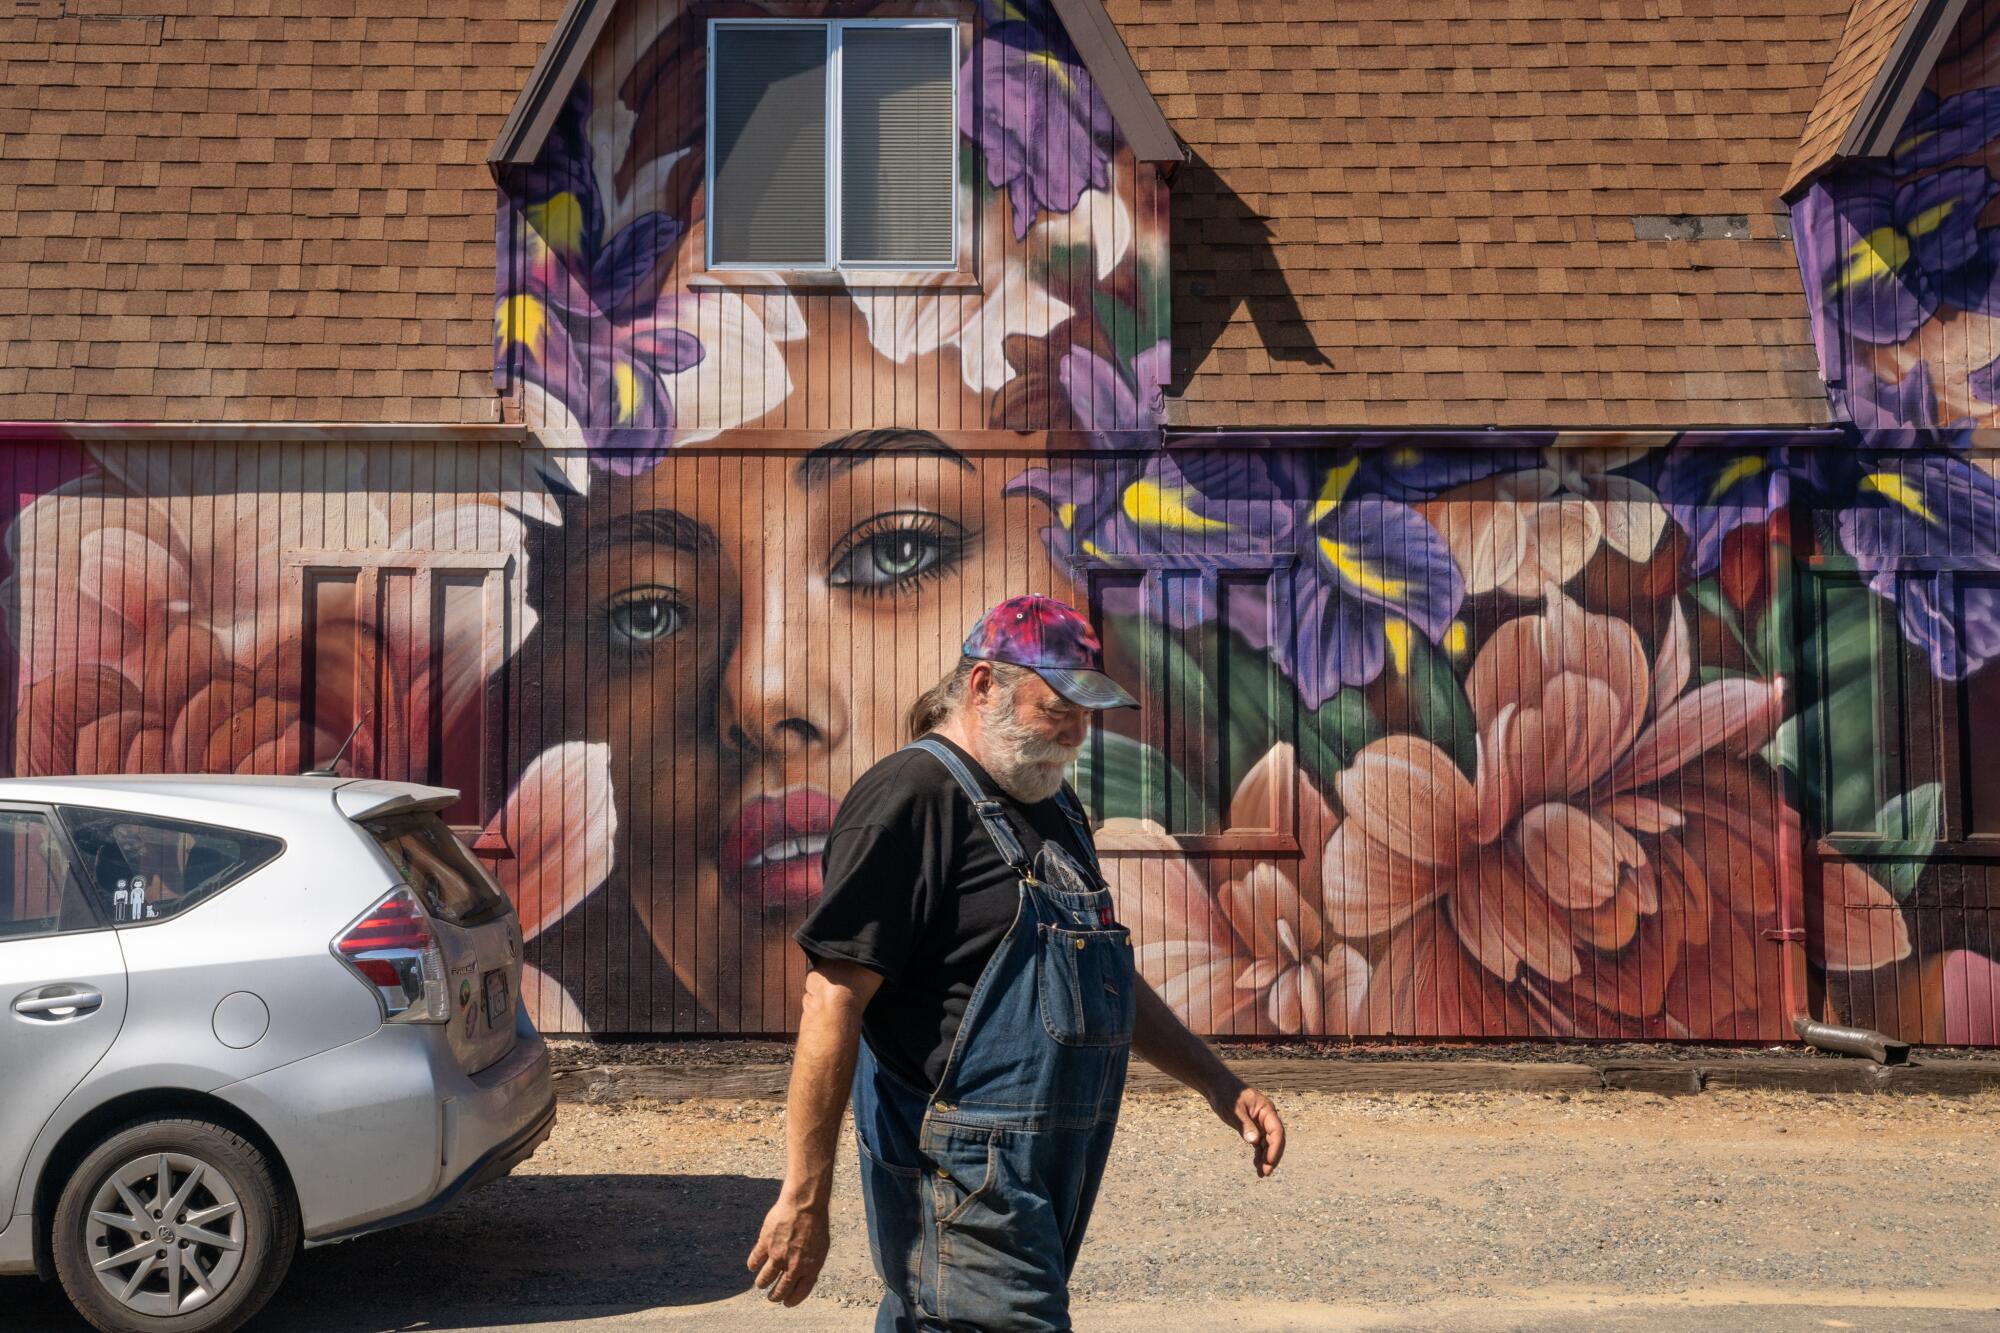 A man wearing overalls walks by a building with a face painted on it.
